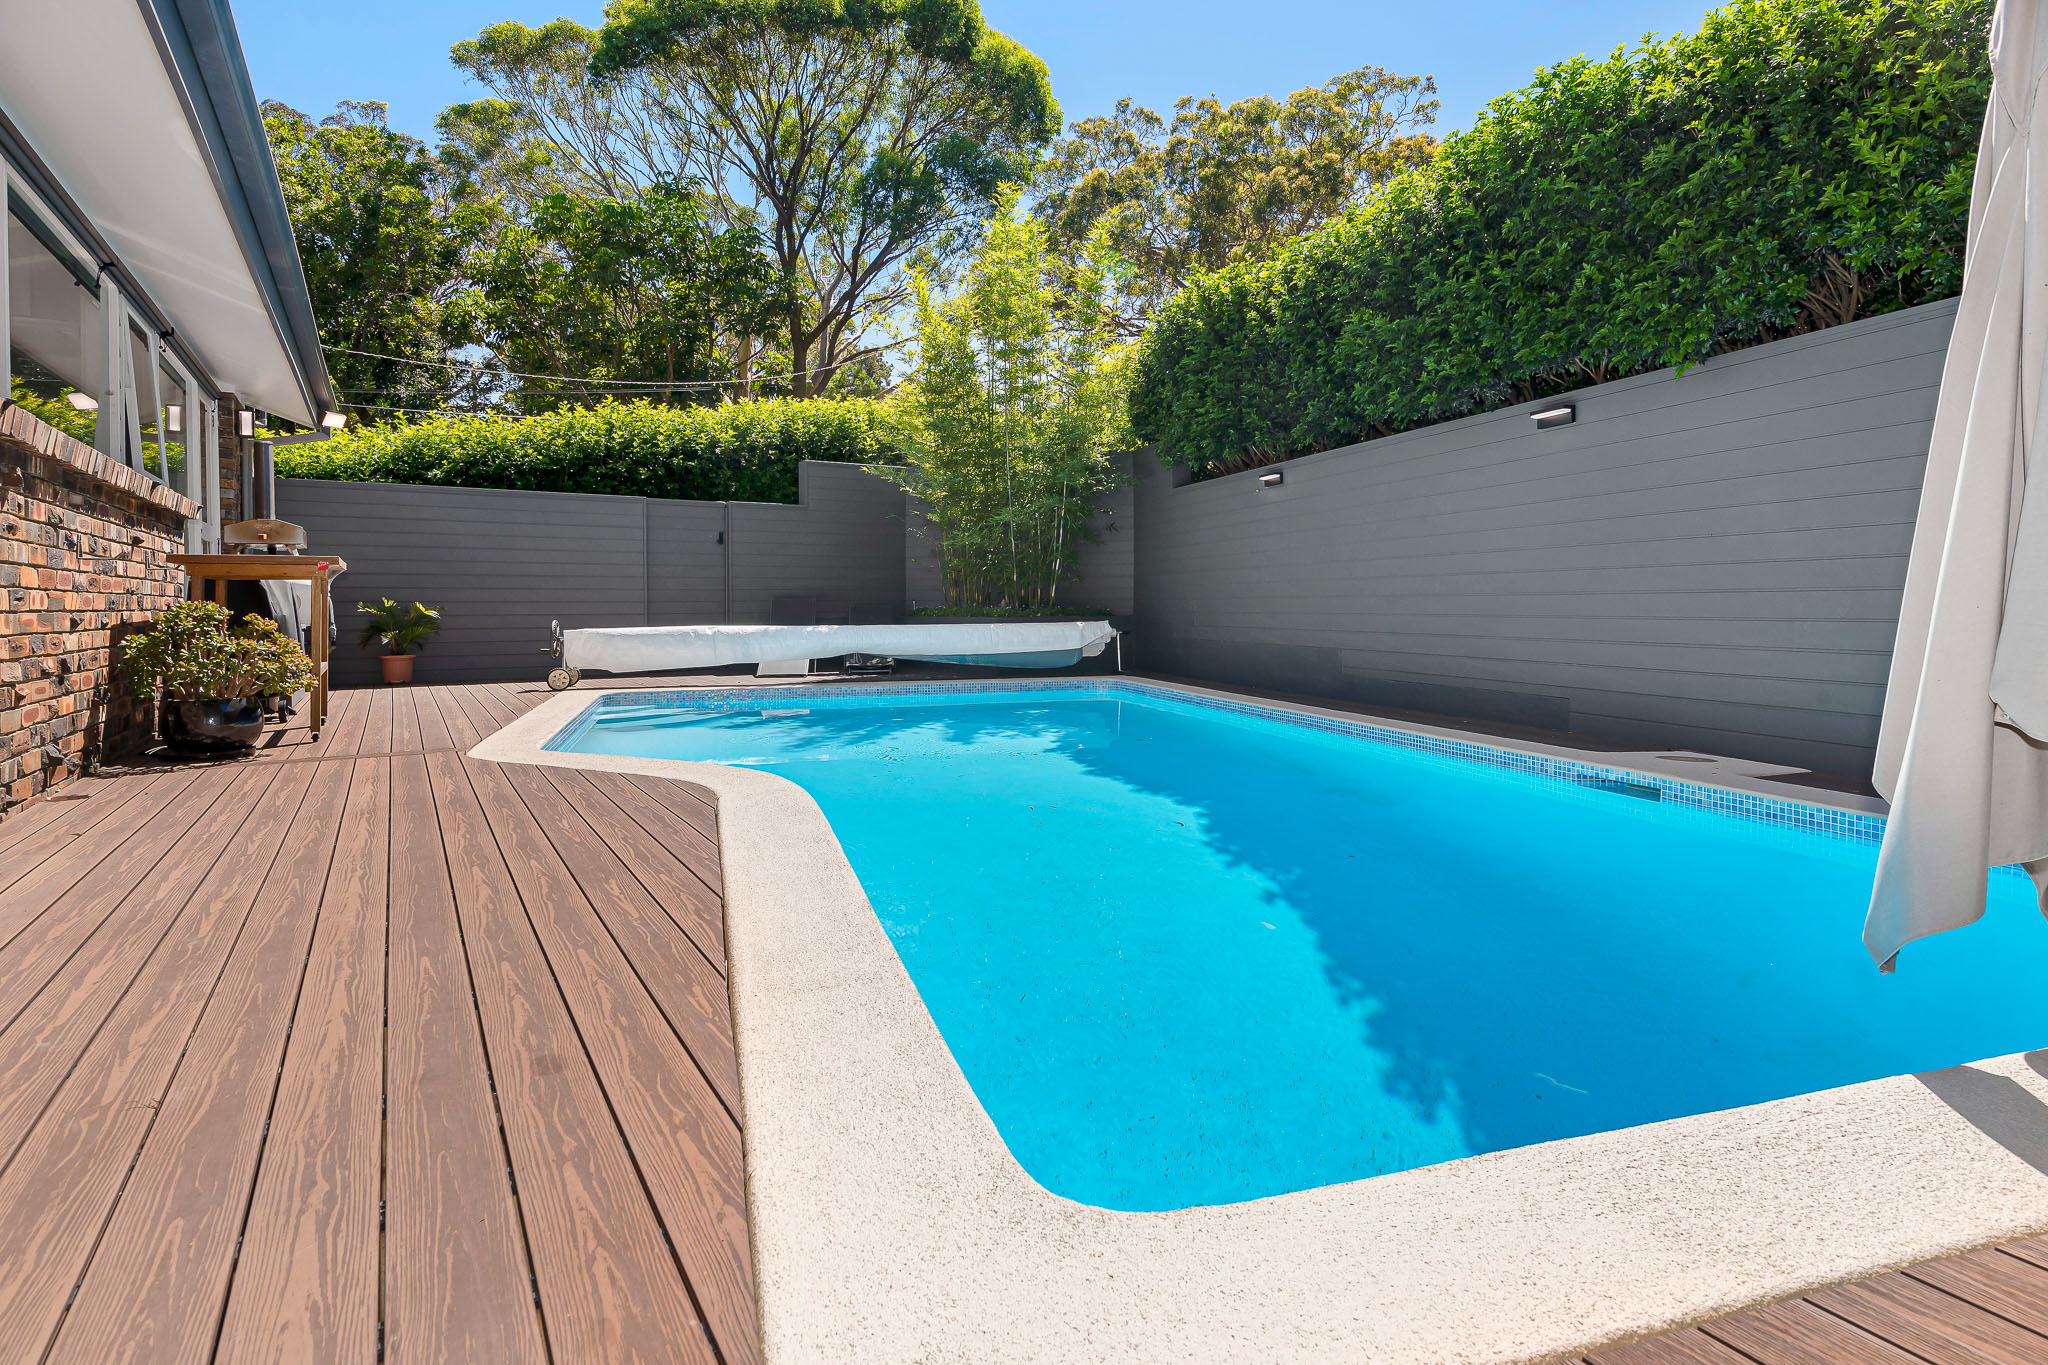 A large, in ground pool with composite deck boards surrounding it